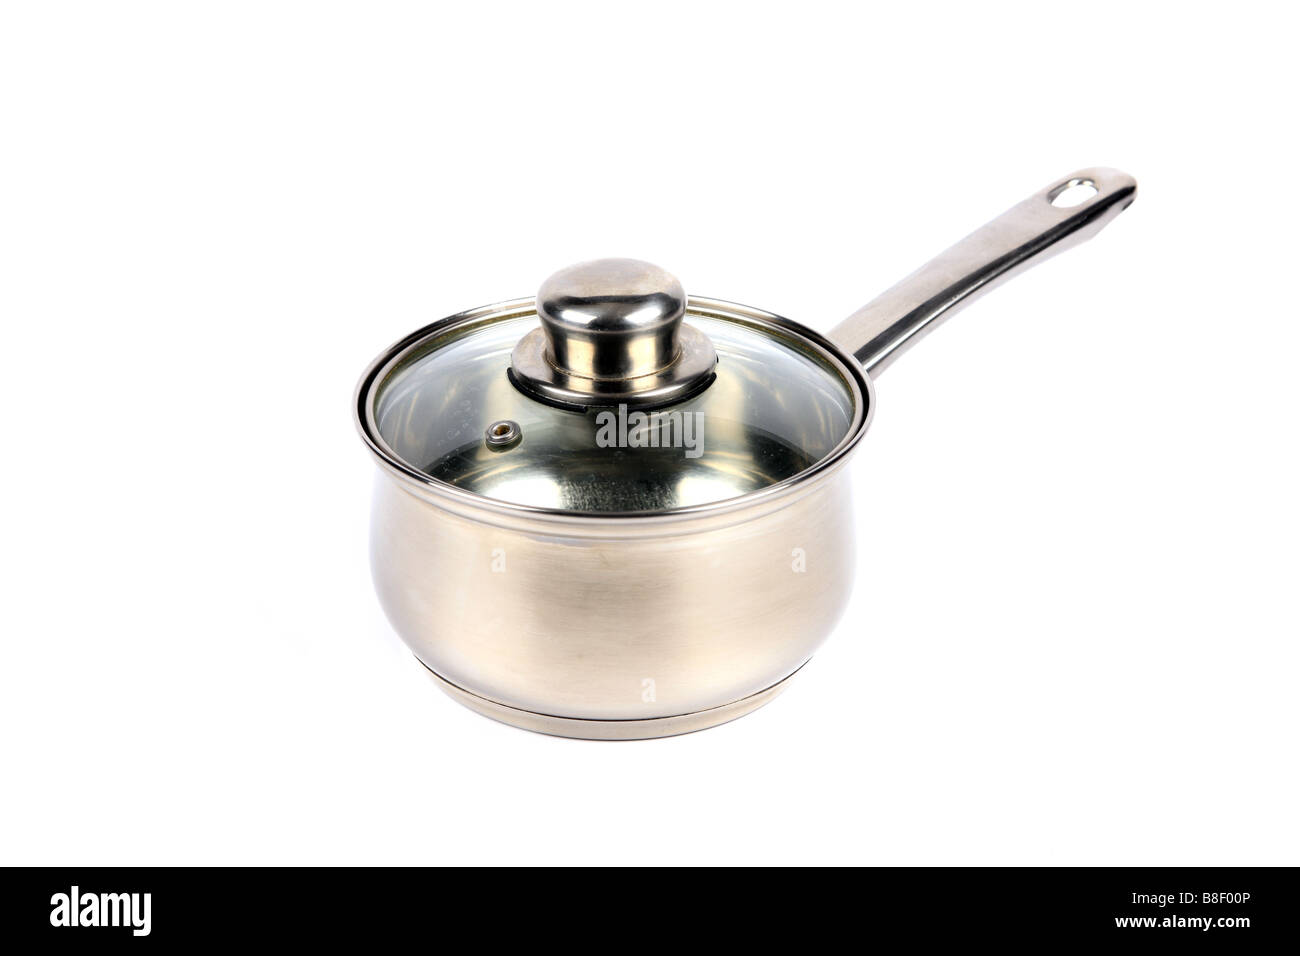 Single Stainless Steel Saucepan with glass lid against a white background Stock Photo